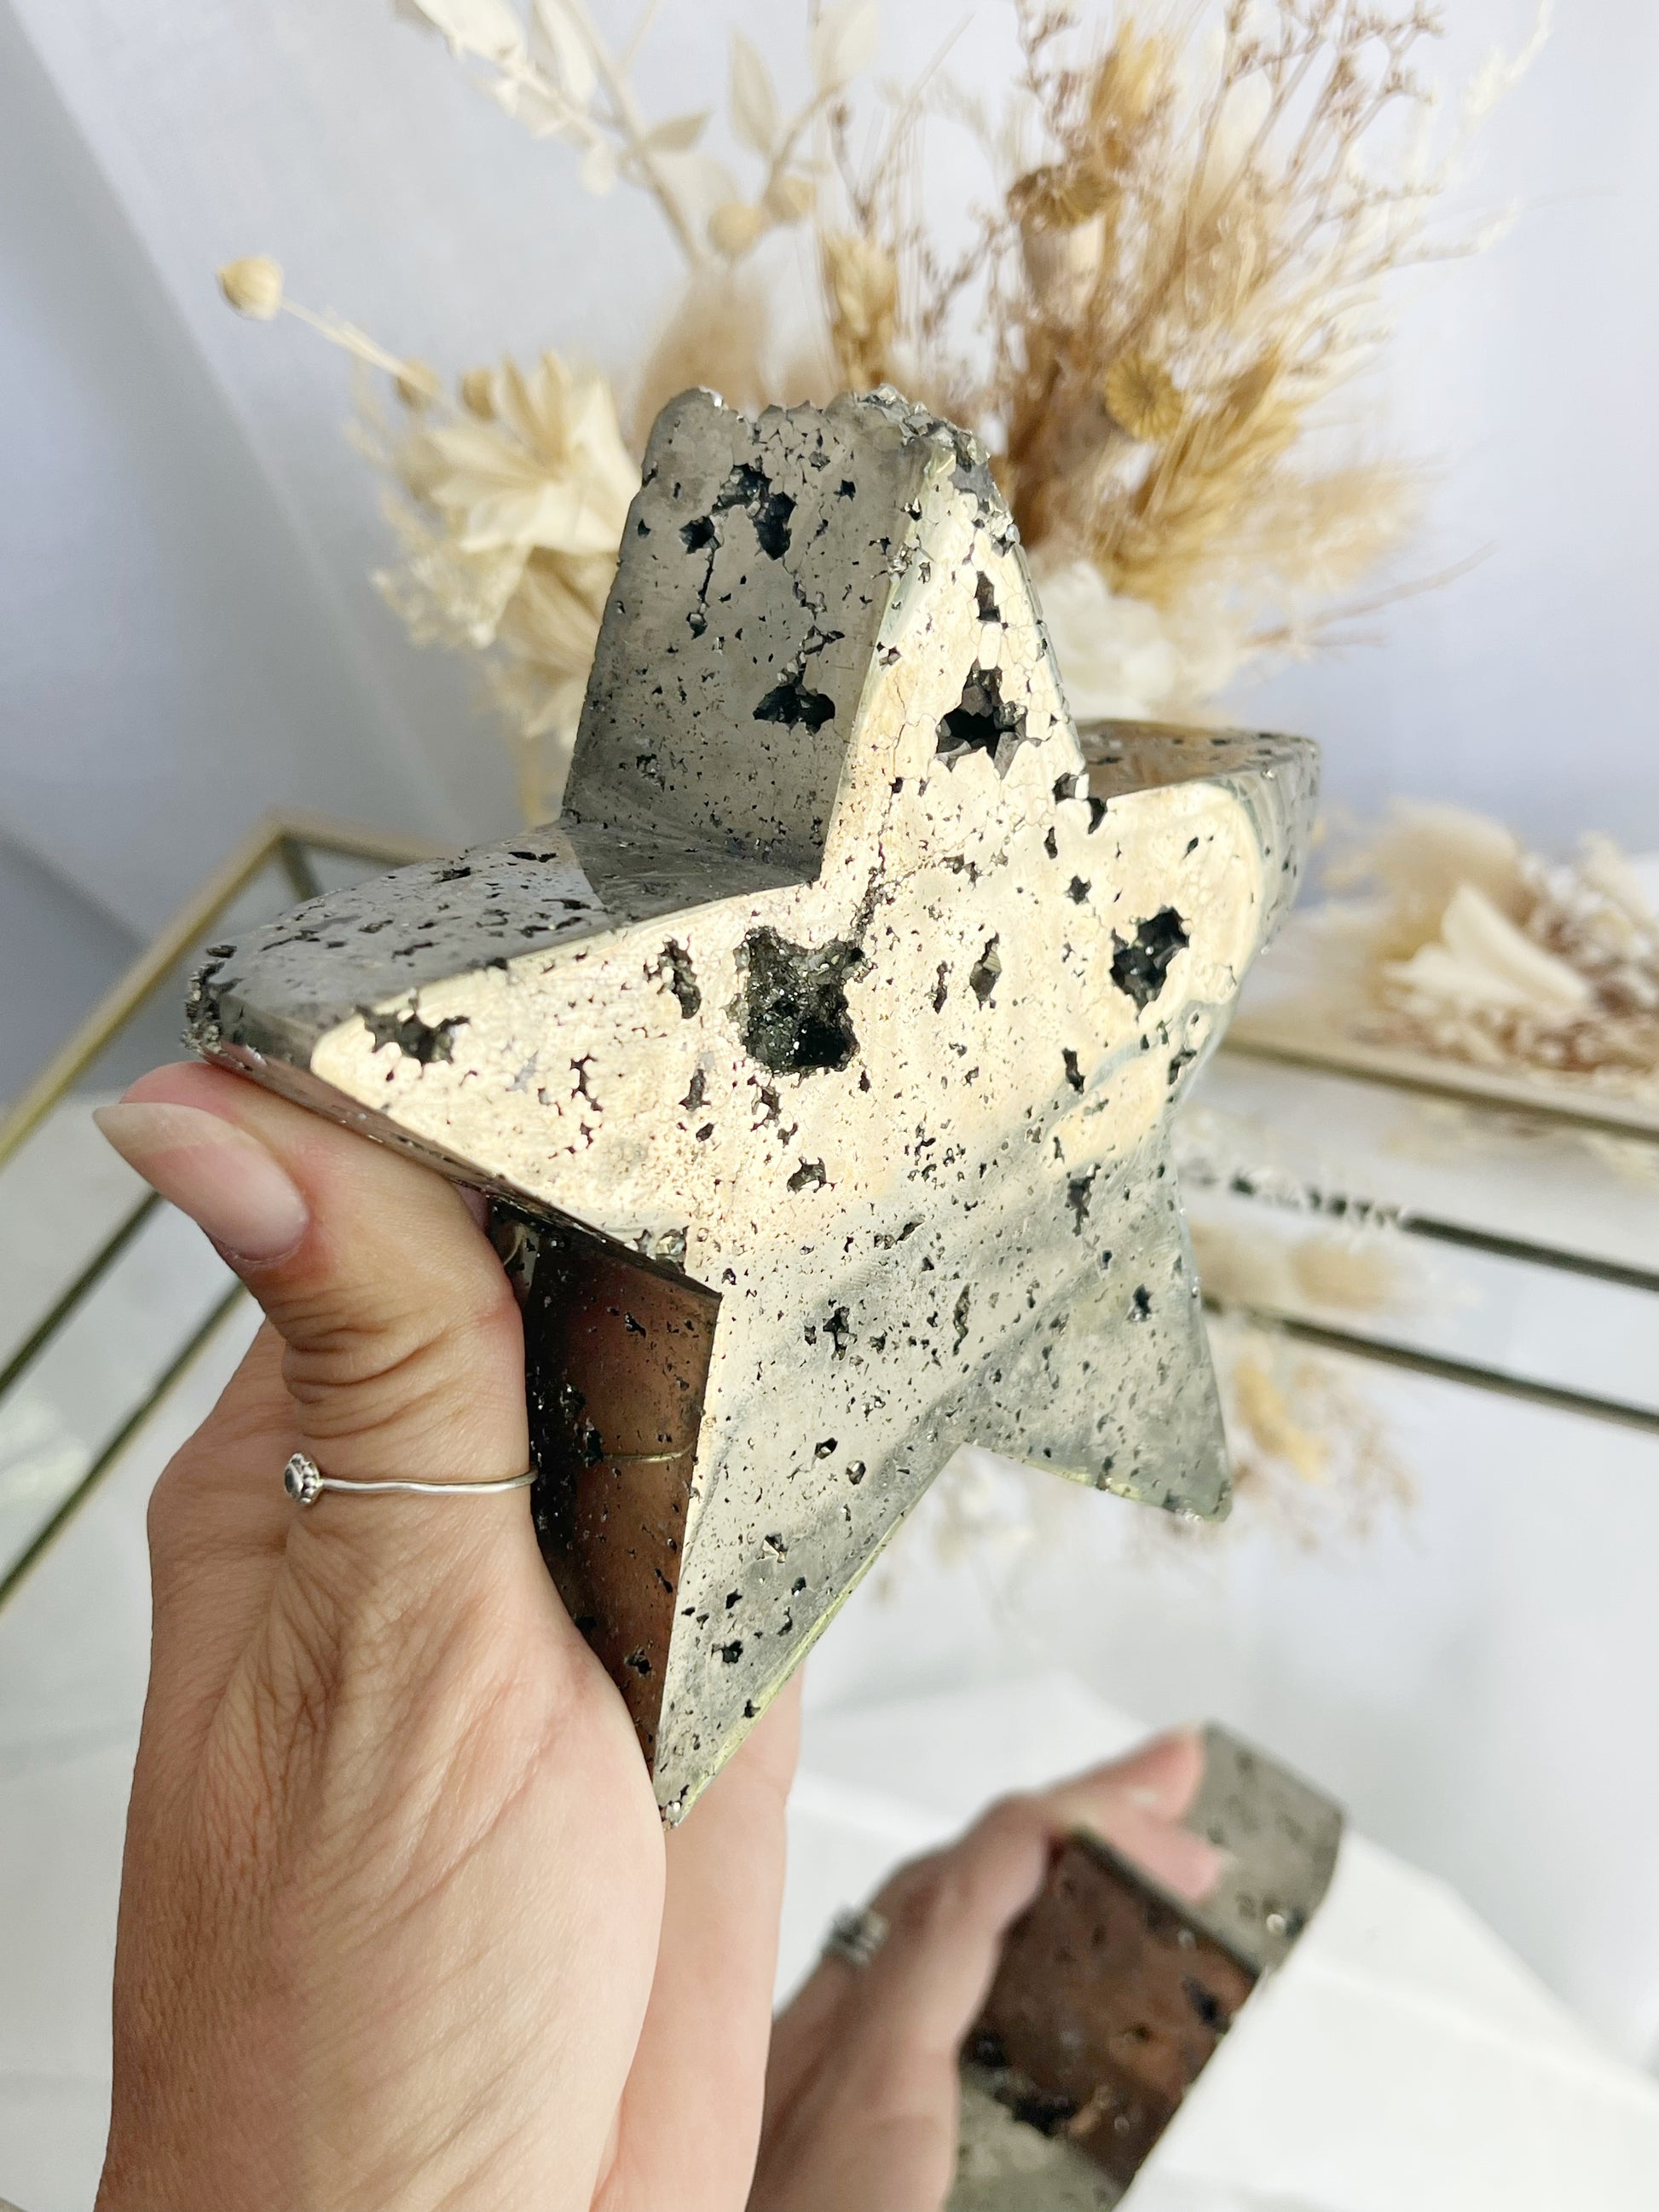 PYRITE STAR CRYSTAL SHOP AUSTRALIA STONED AND SAGED